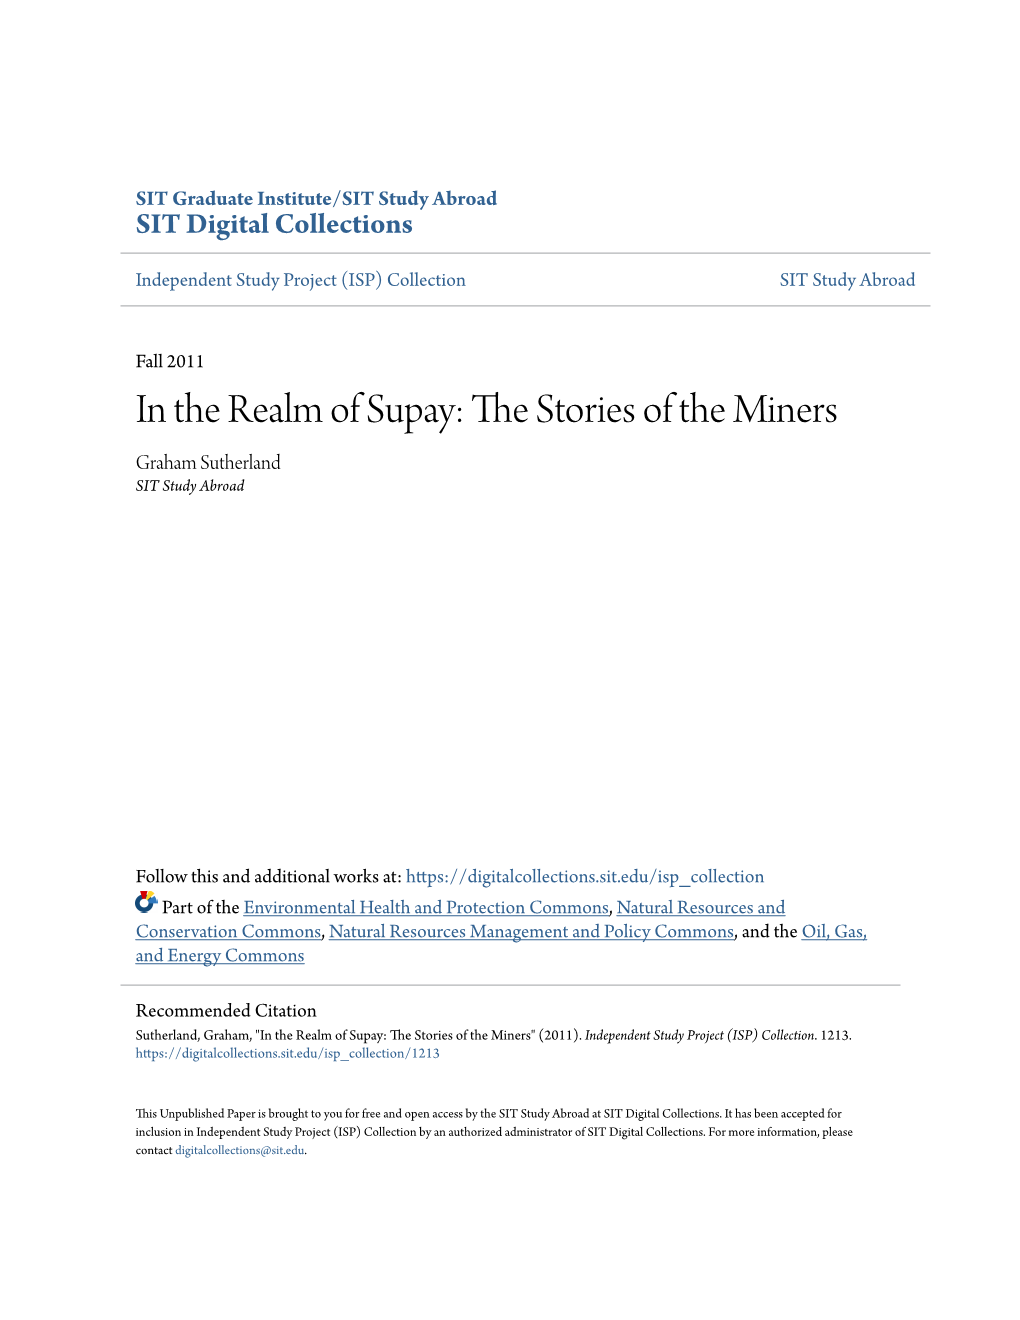 In the Realm of Supay: the Stories of the Miners